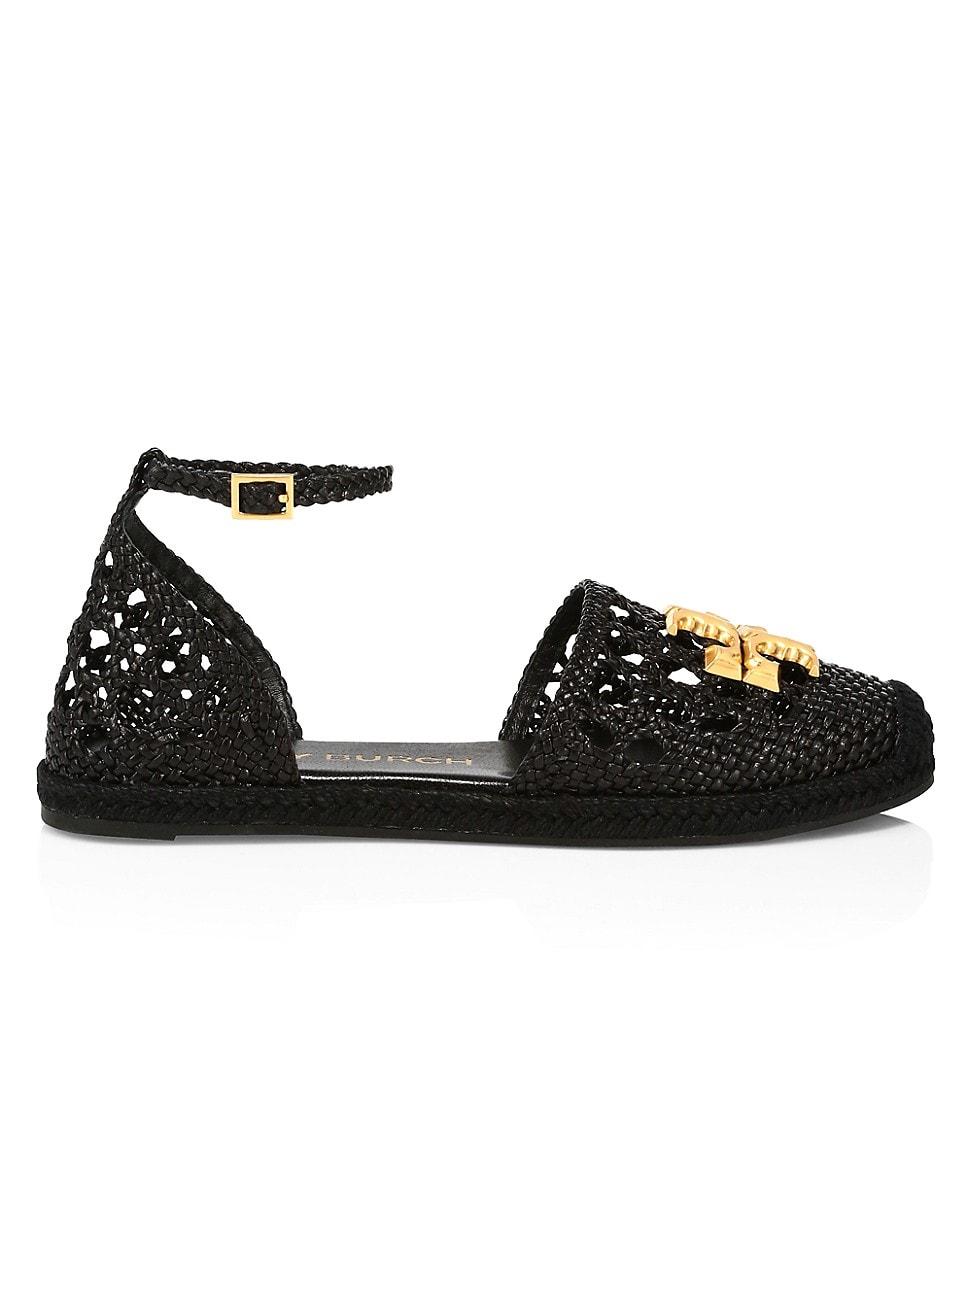 Tory Burch Eleanor Woven Leather D'orsay Espadrille Sandals in Black | Lyst